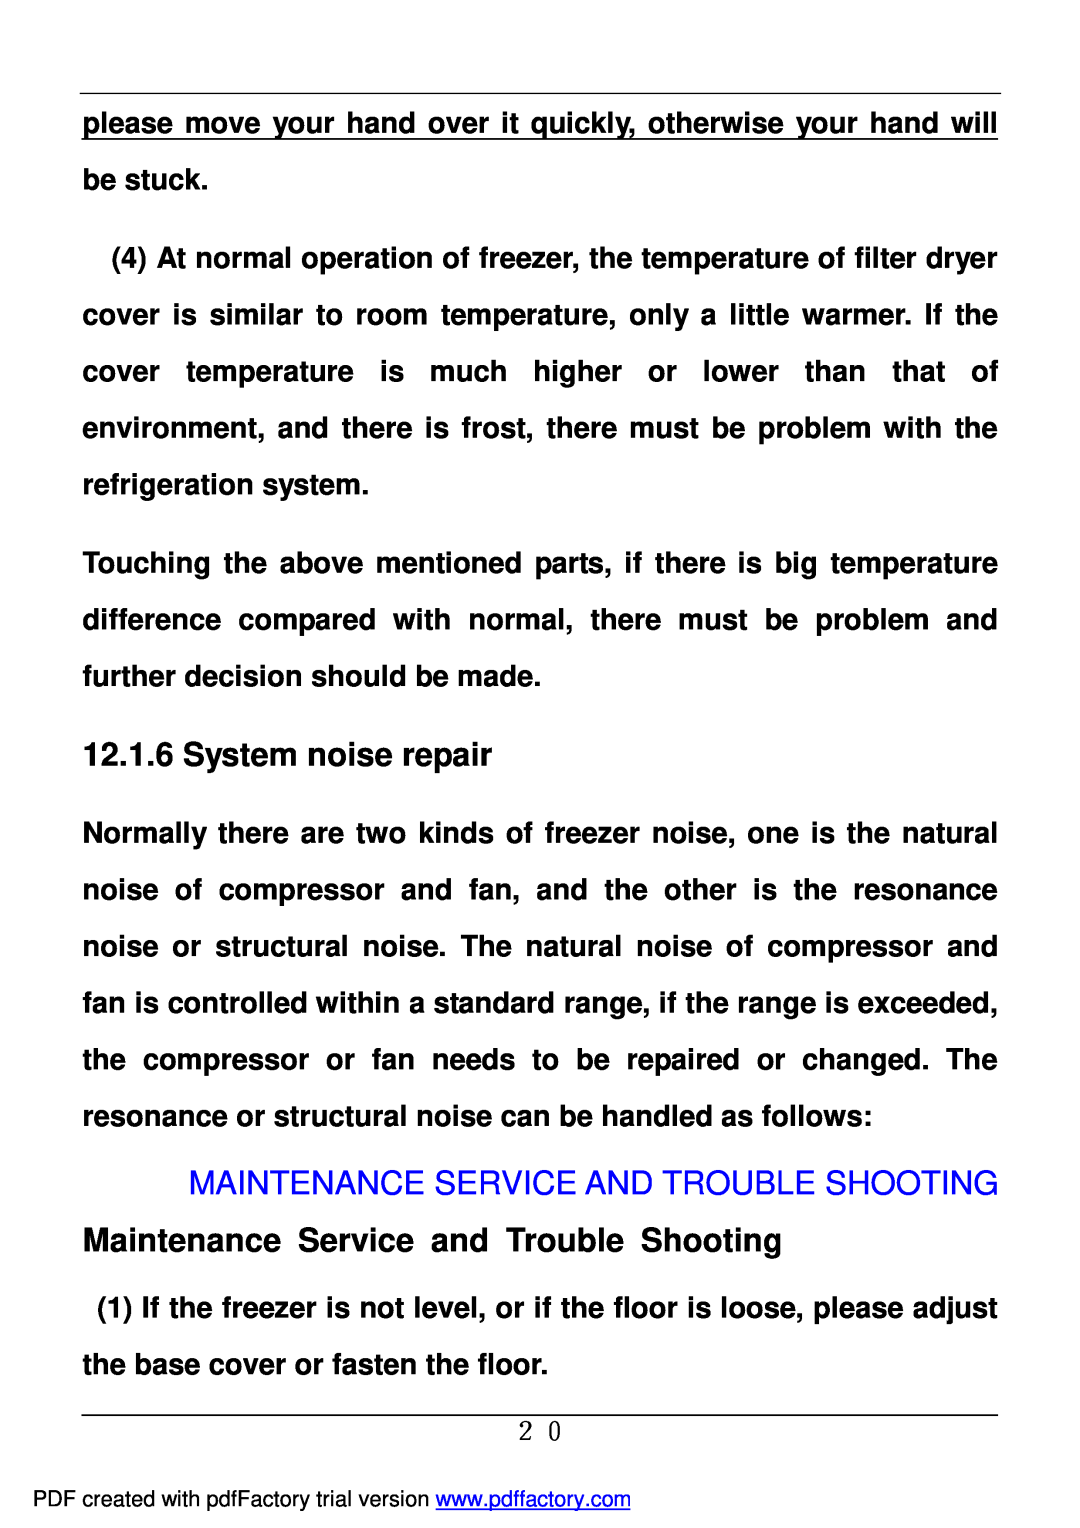 Haier BD-478A System noise repair, Maintenance Service And Trouble Shooting, Maintenance Service and Trouble Shooting 